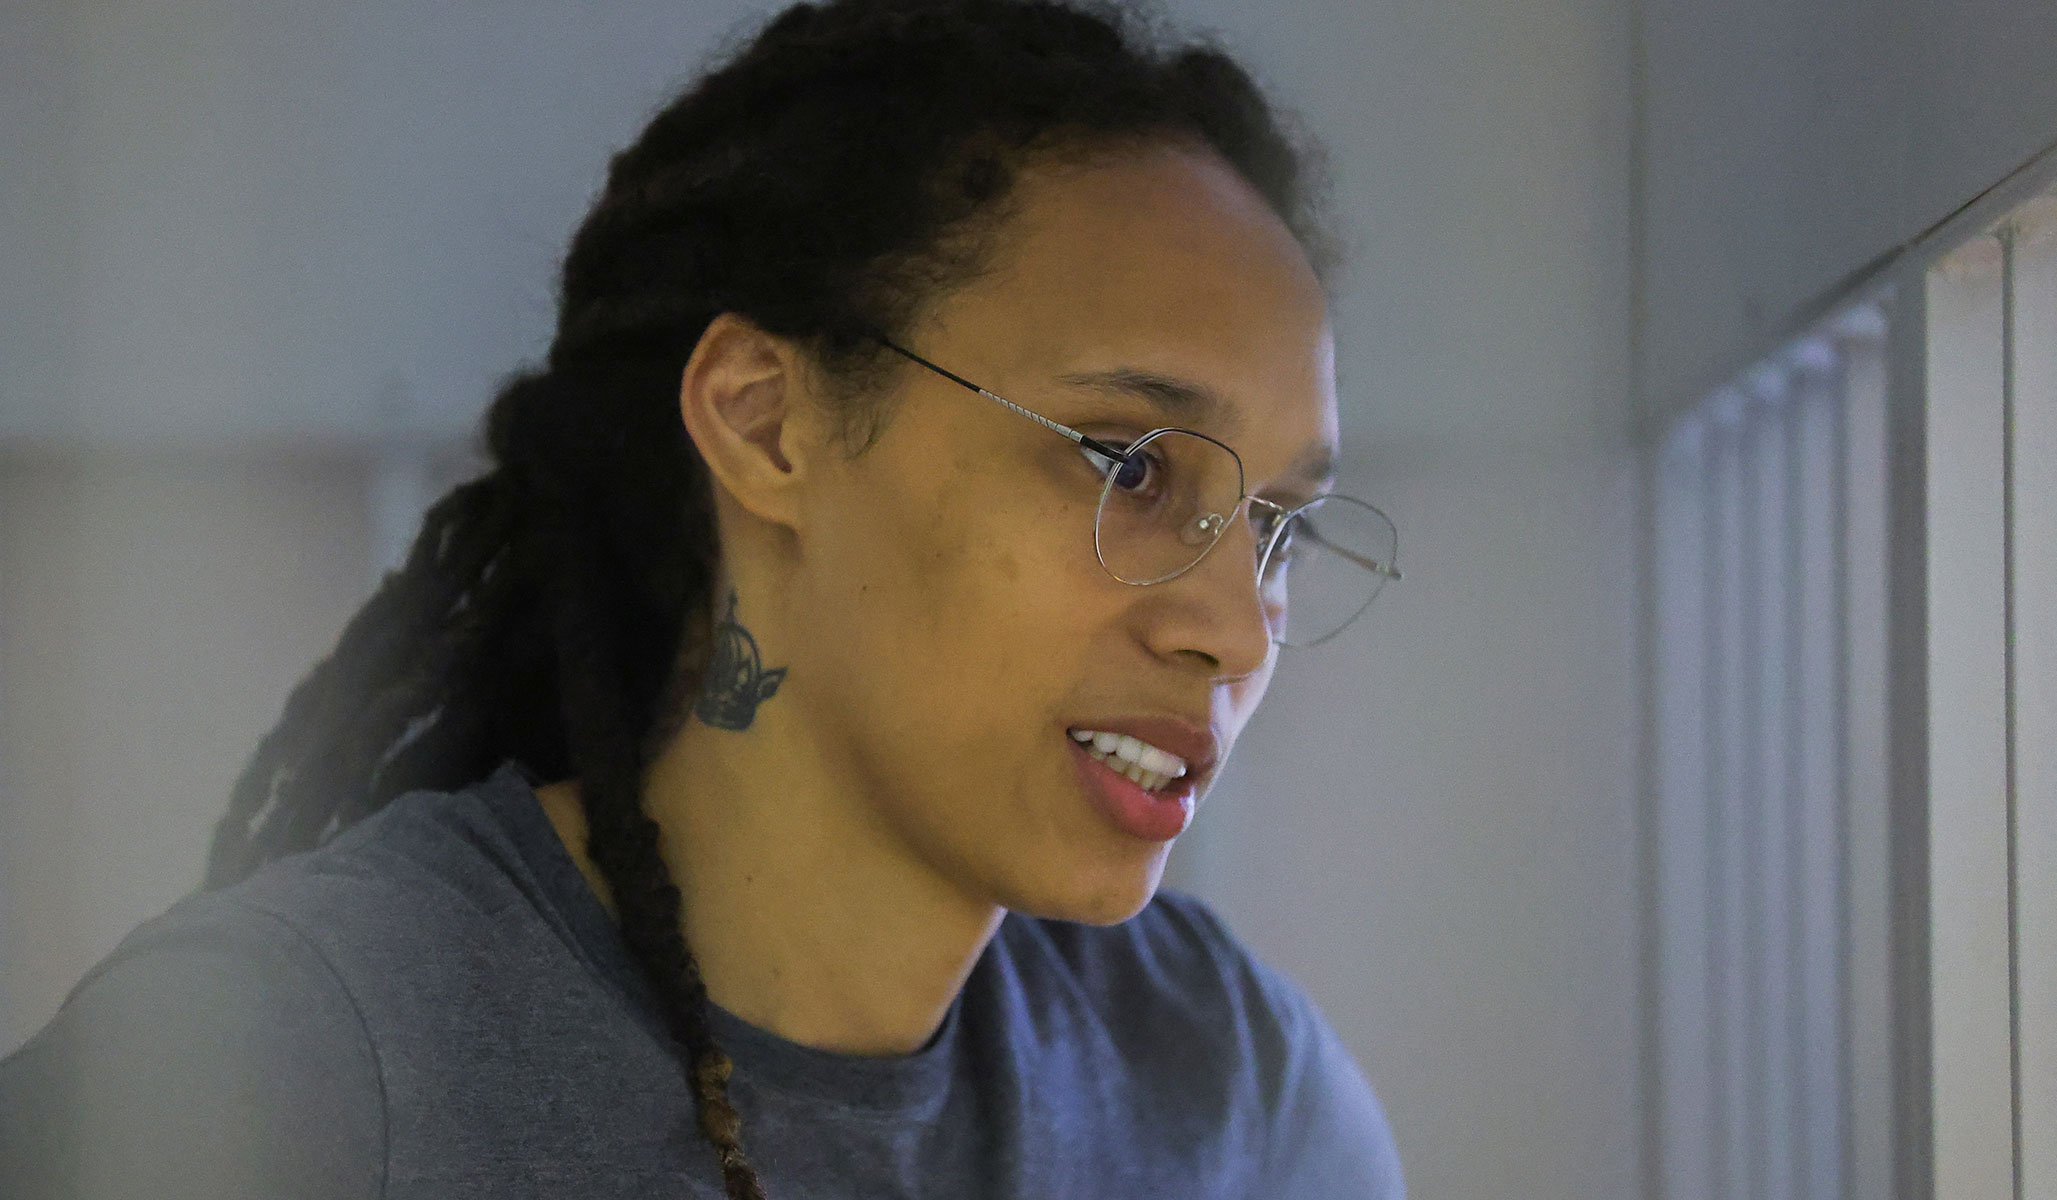 Brittney Griner Release: Deal Increases Risks for Americans Abroad